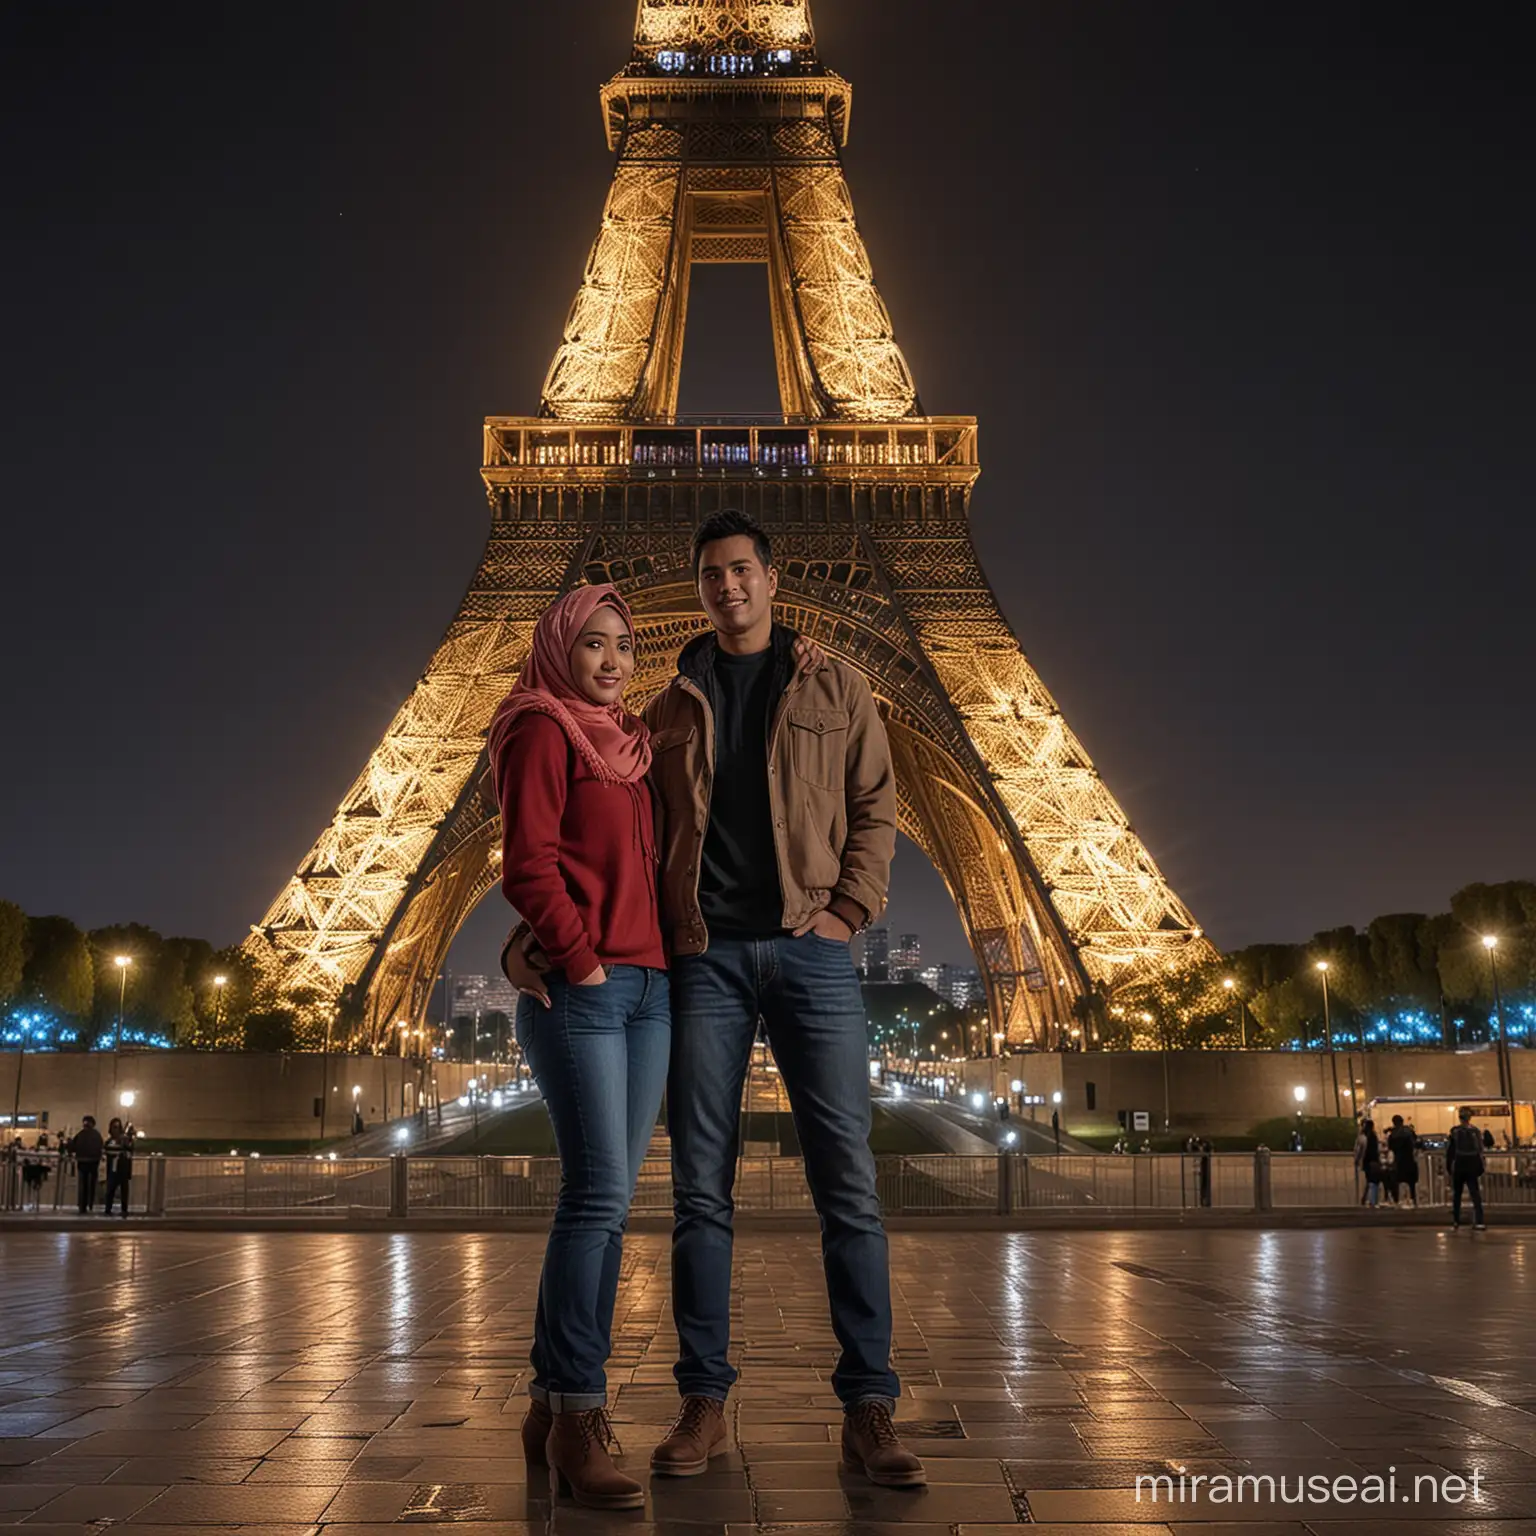 Indonesian Couple in Hijab and Sweater Under Eiffel Tower at Night